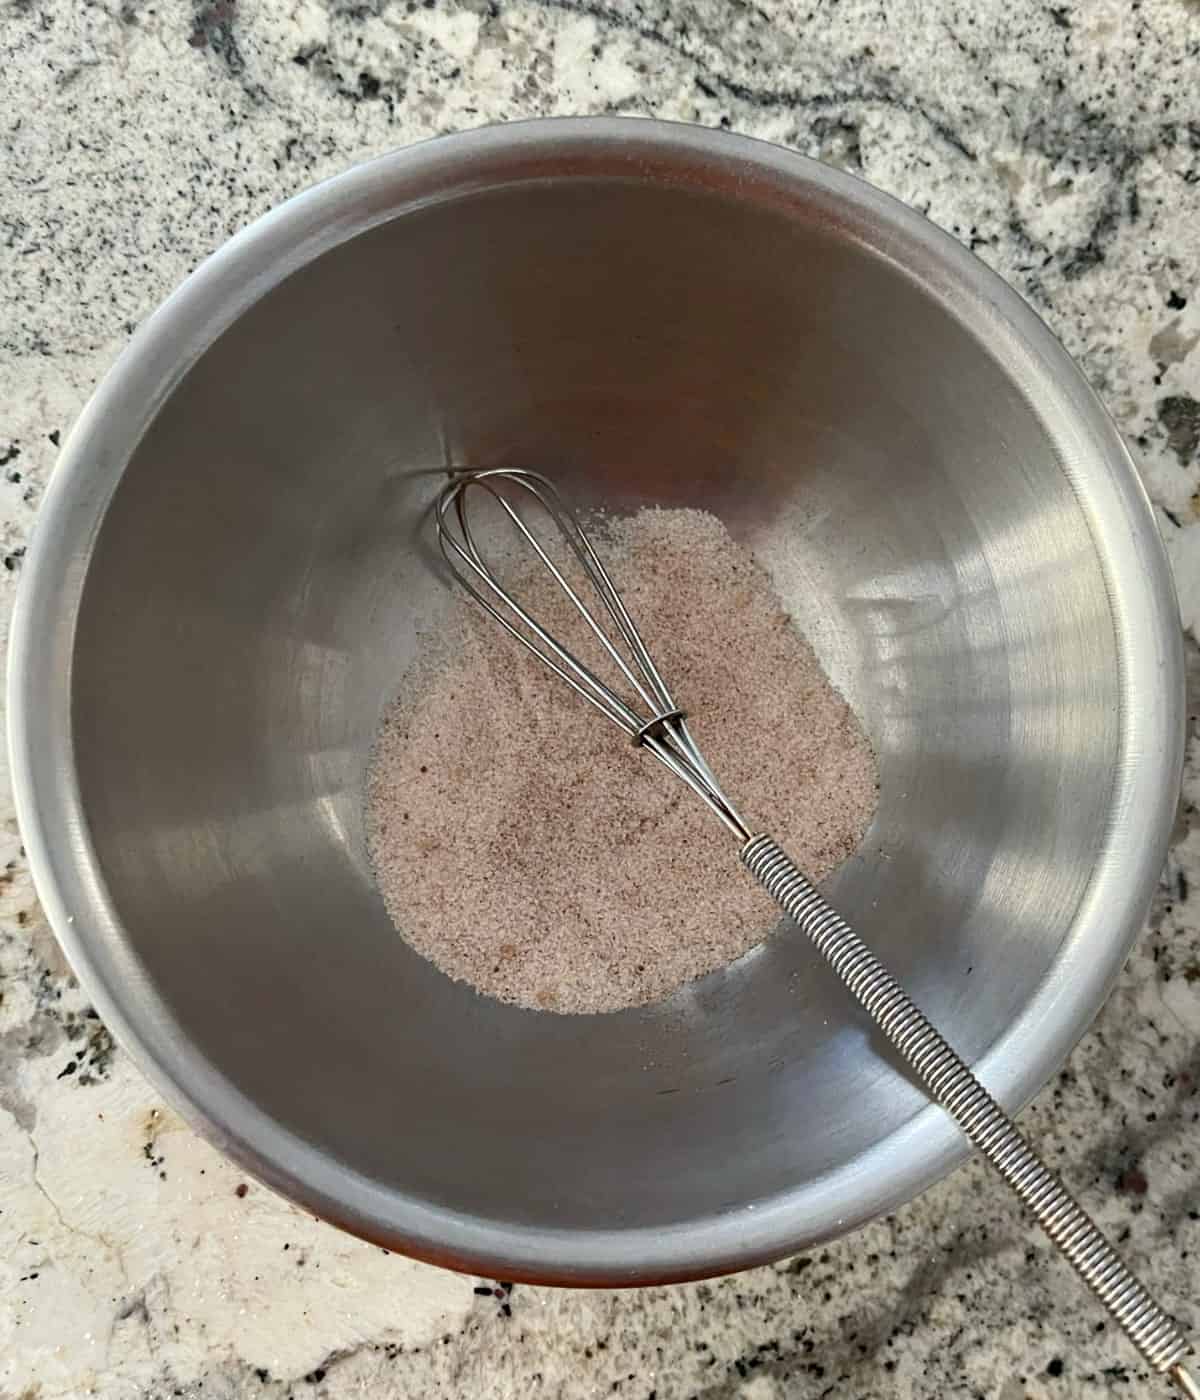 Cinnamon-sugar mixture in small bowl with whisk.